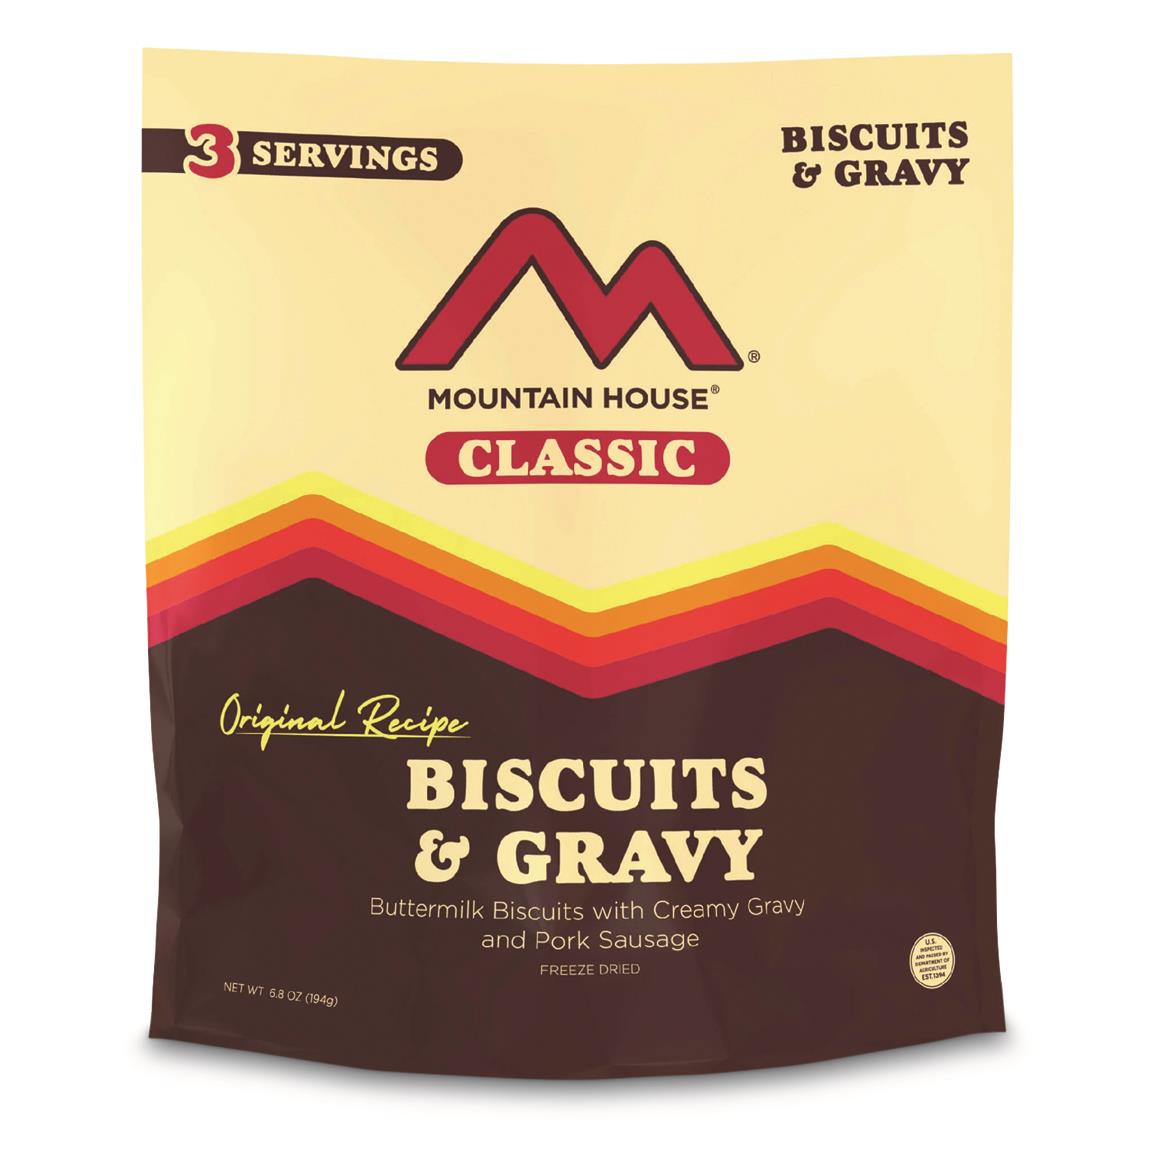 Mountain House Classic Biscuits & Gravy